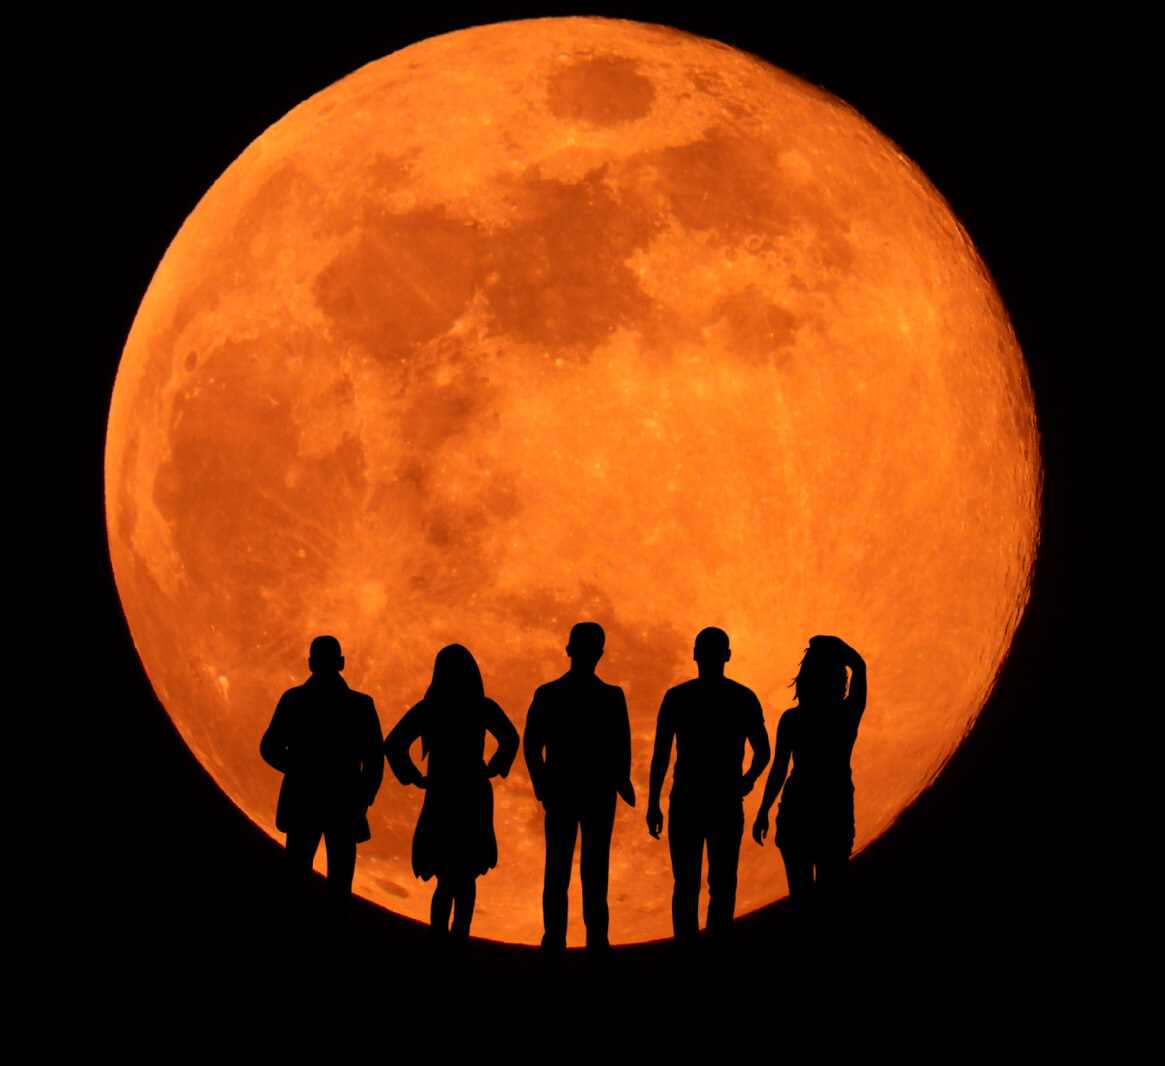 people shadows in front of eclipsed moon